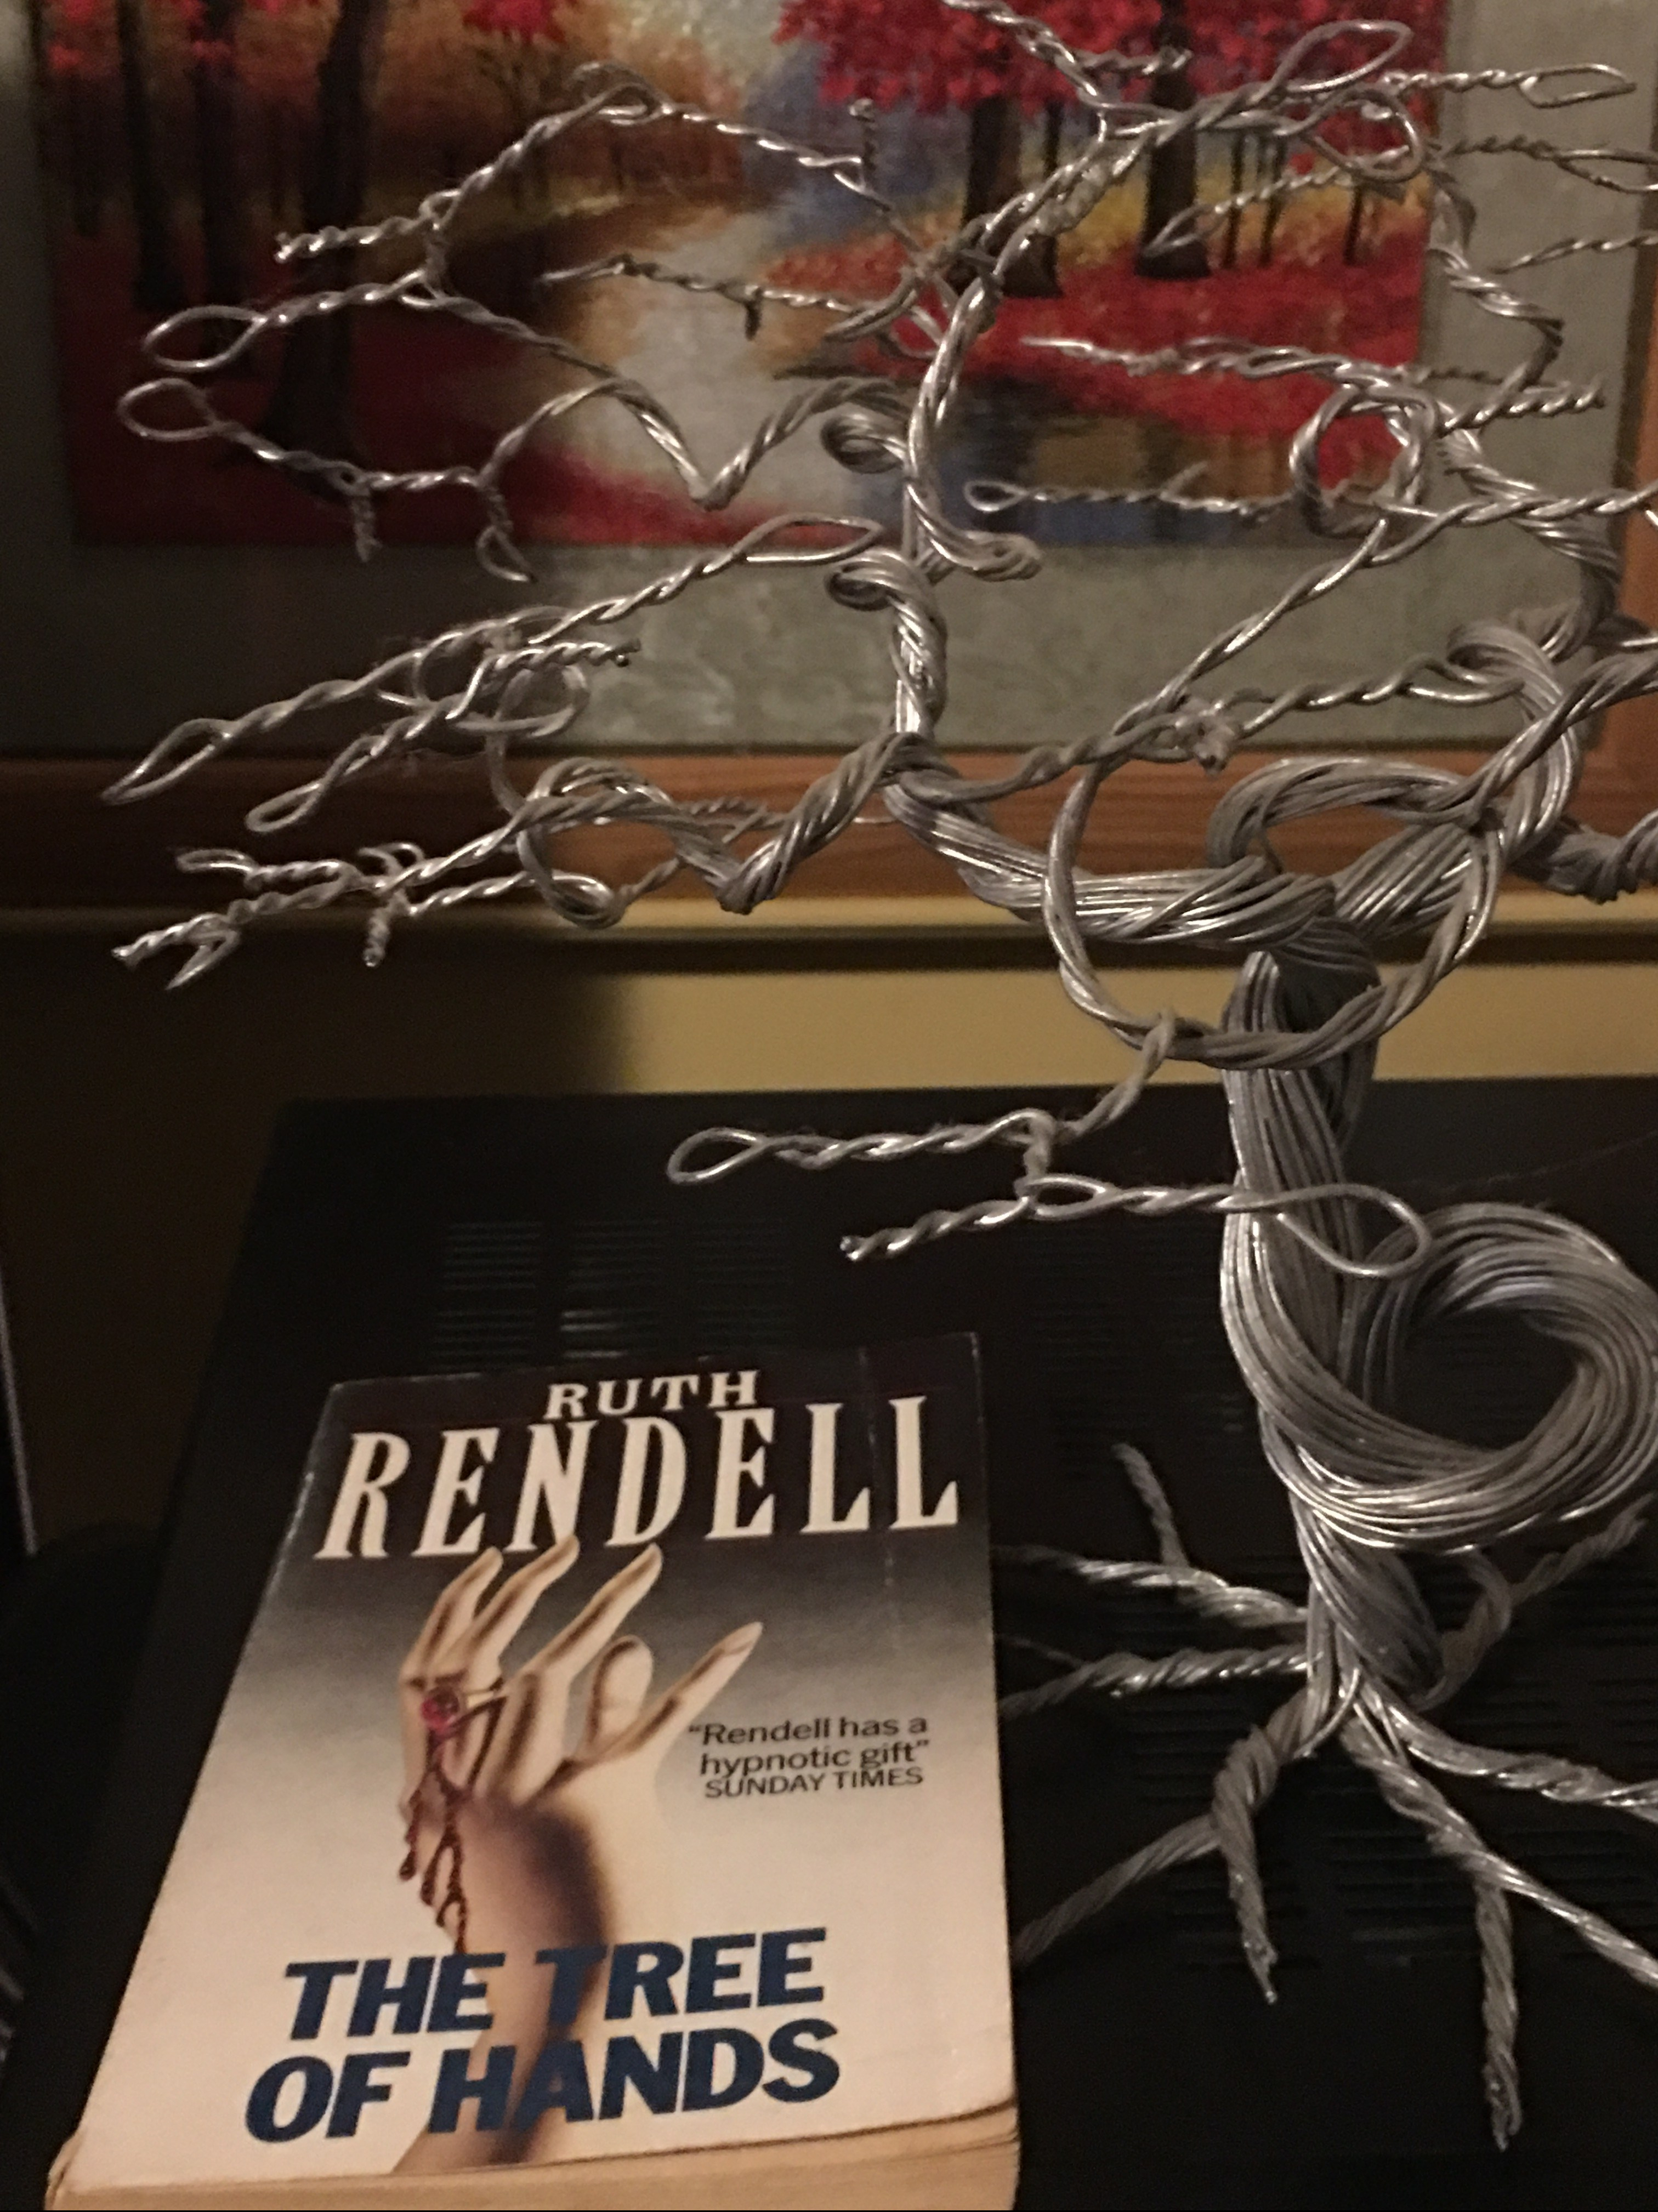 Ruth Rendell's Tree of Hands